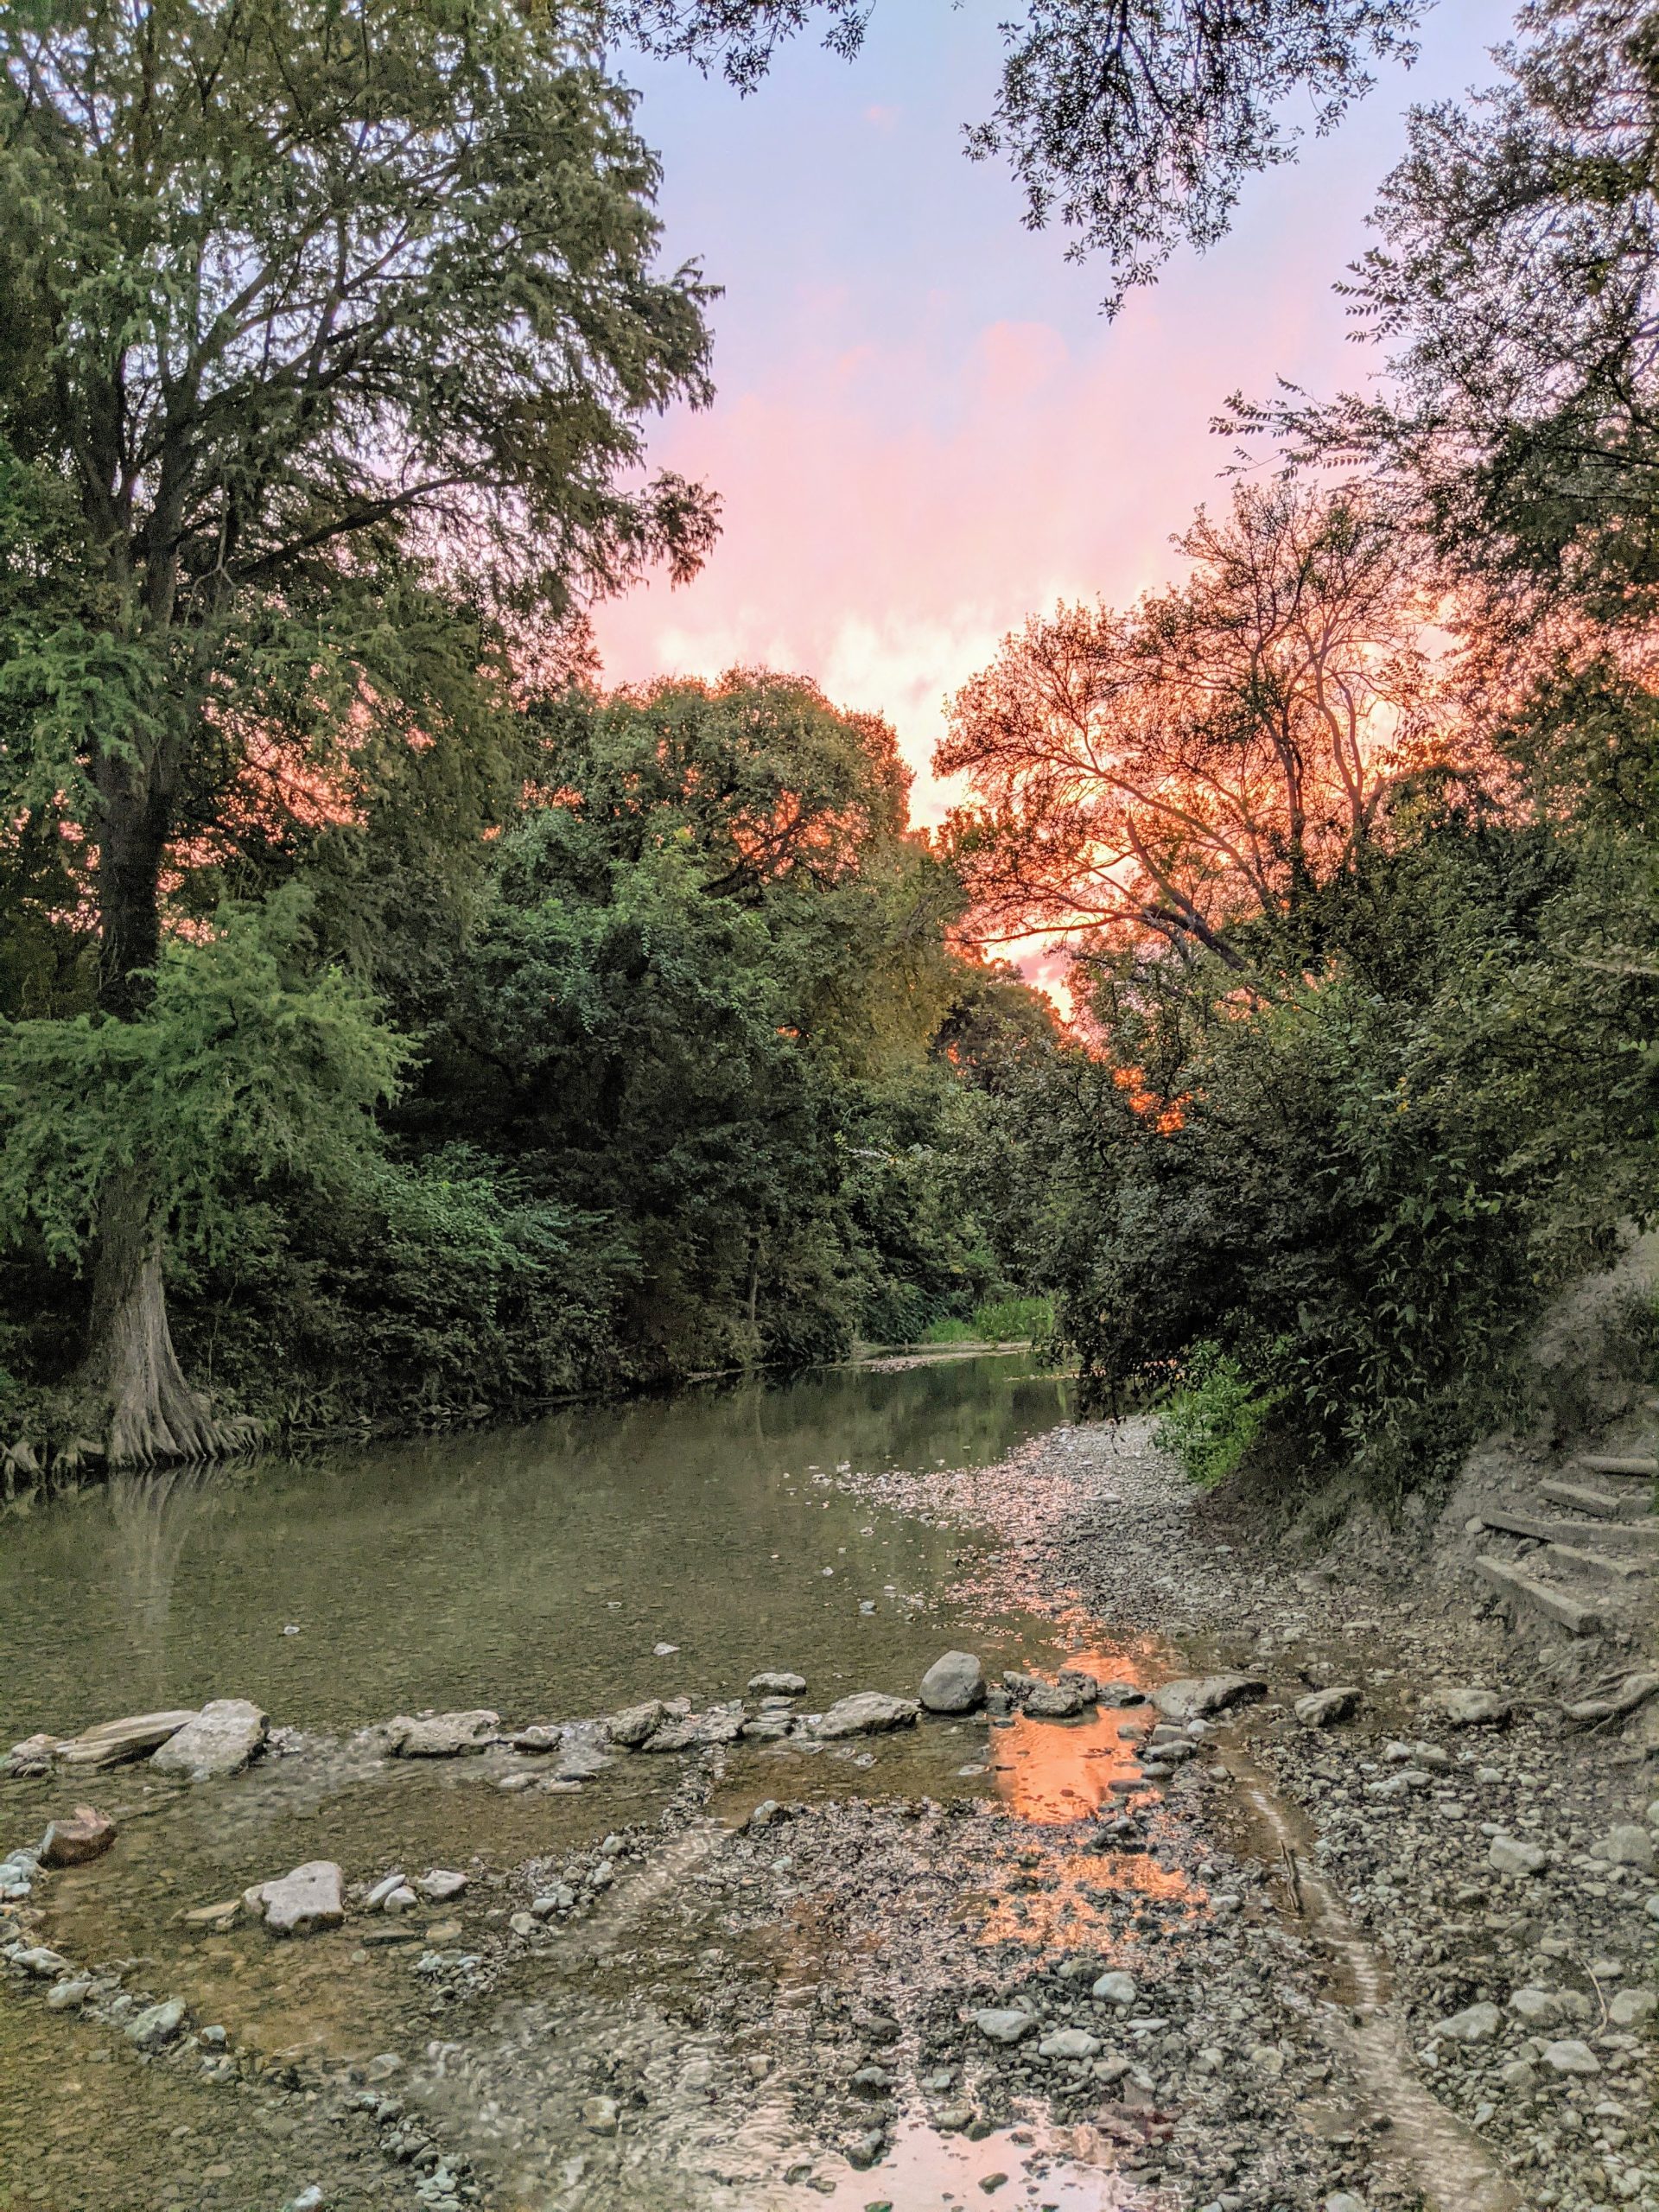 New homes in New Braunfels Texas nestled alongside a scenic river flowing through lush parks and trails, adorned with rocks and trees, illuminated by the striking hues of a captivating sunset.